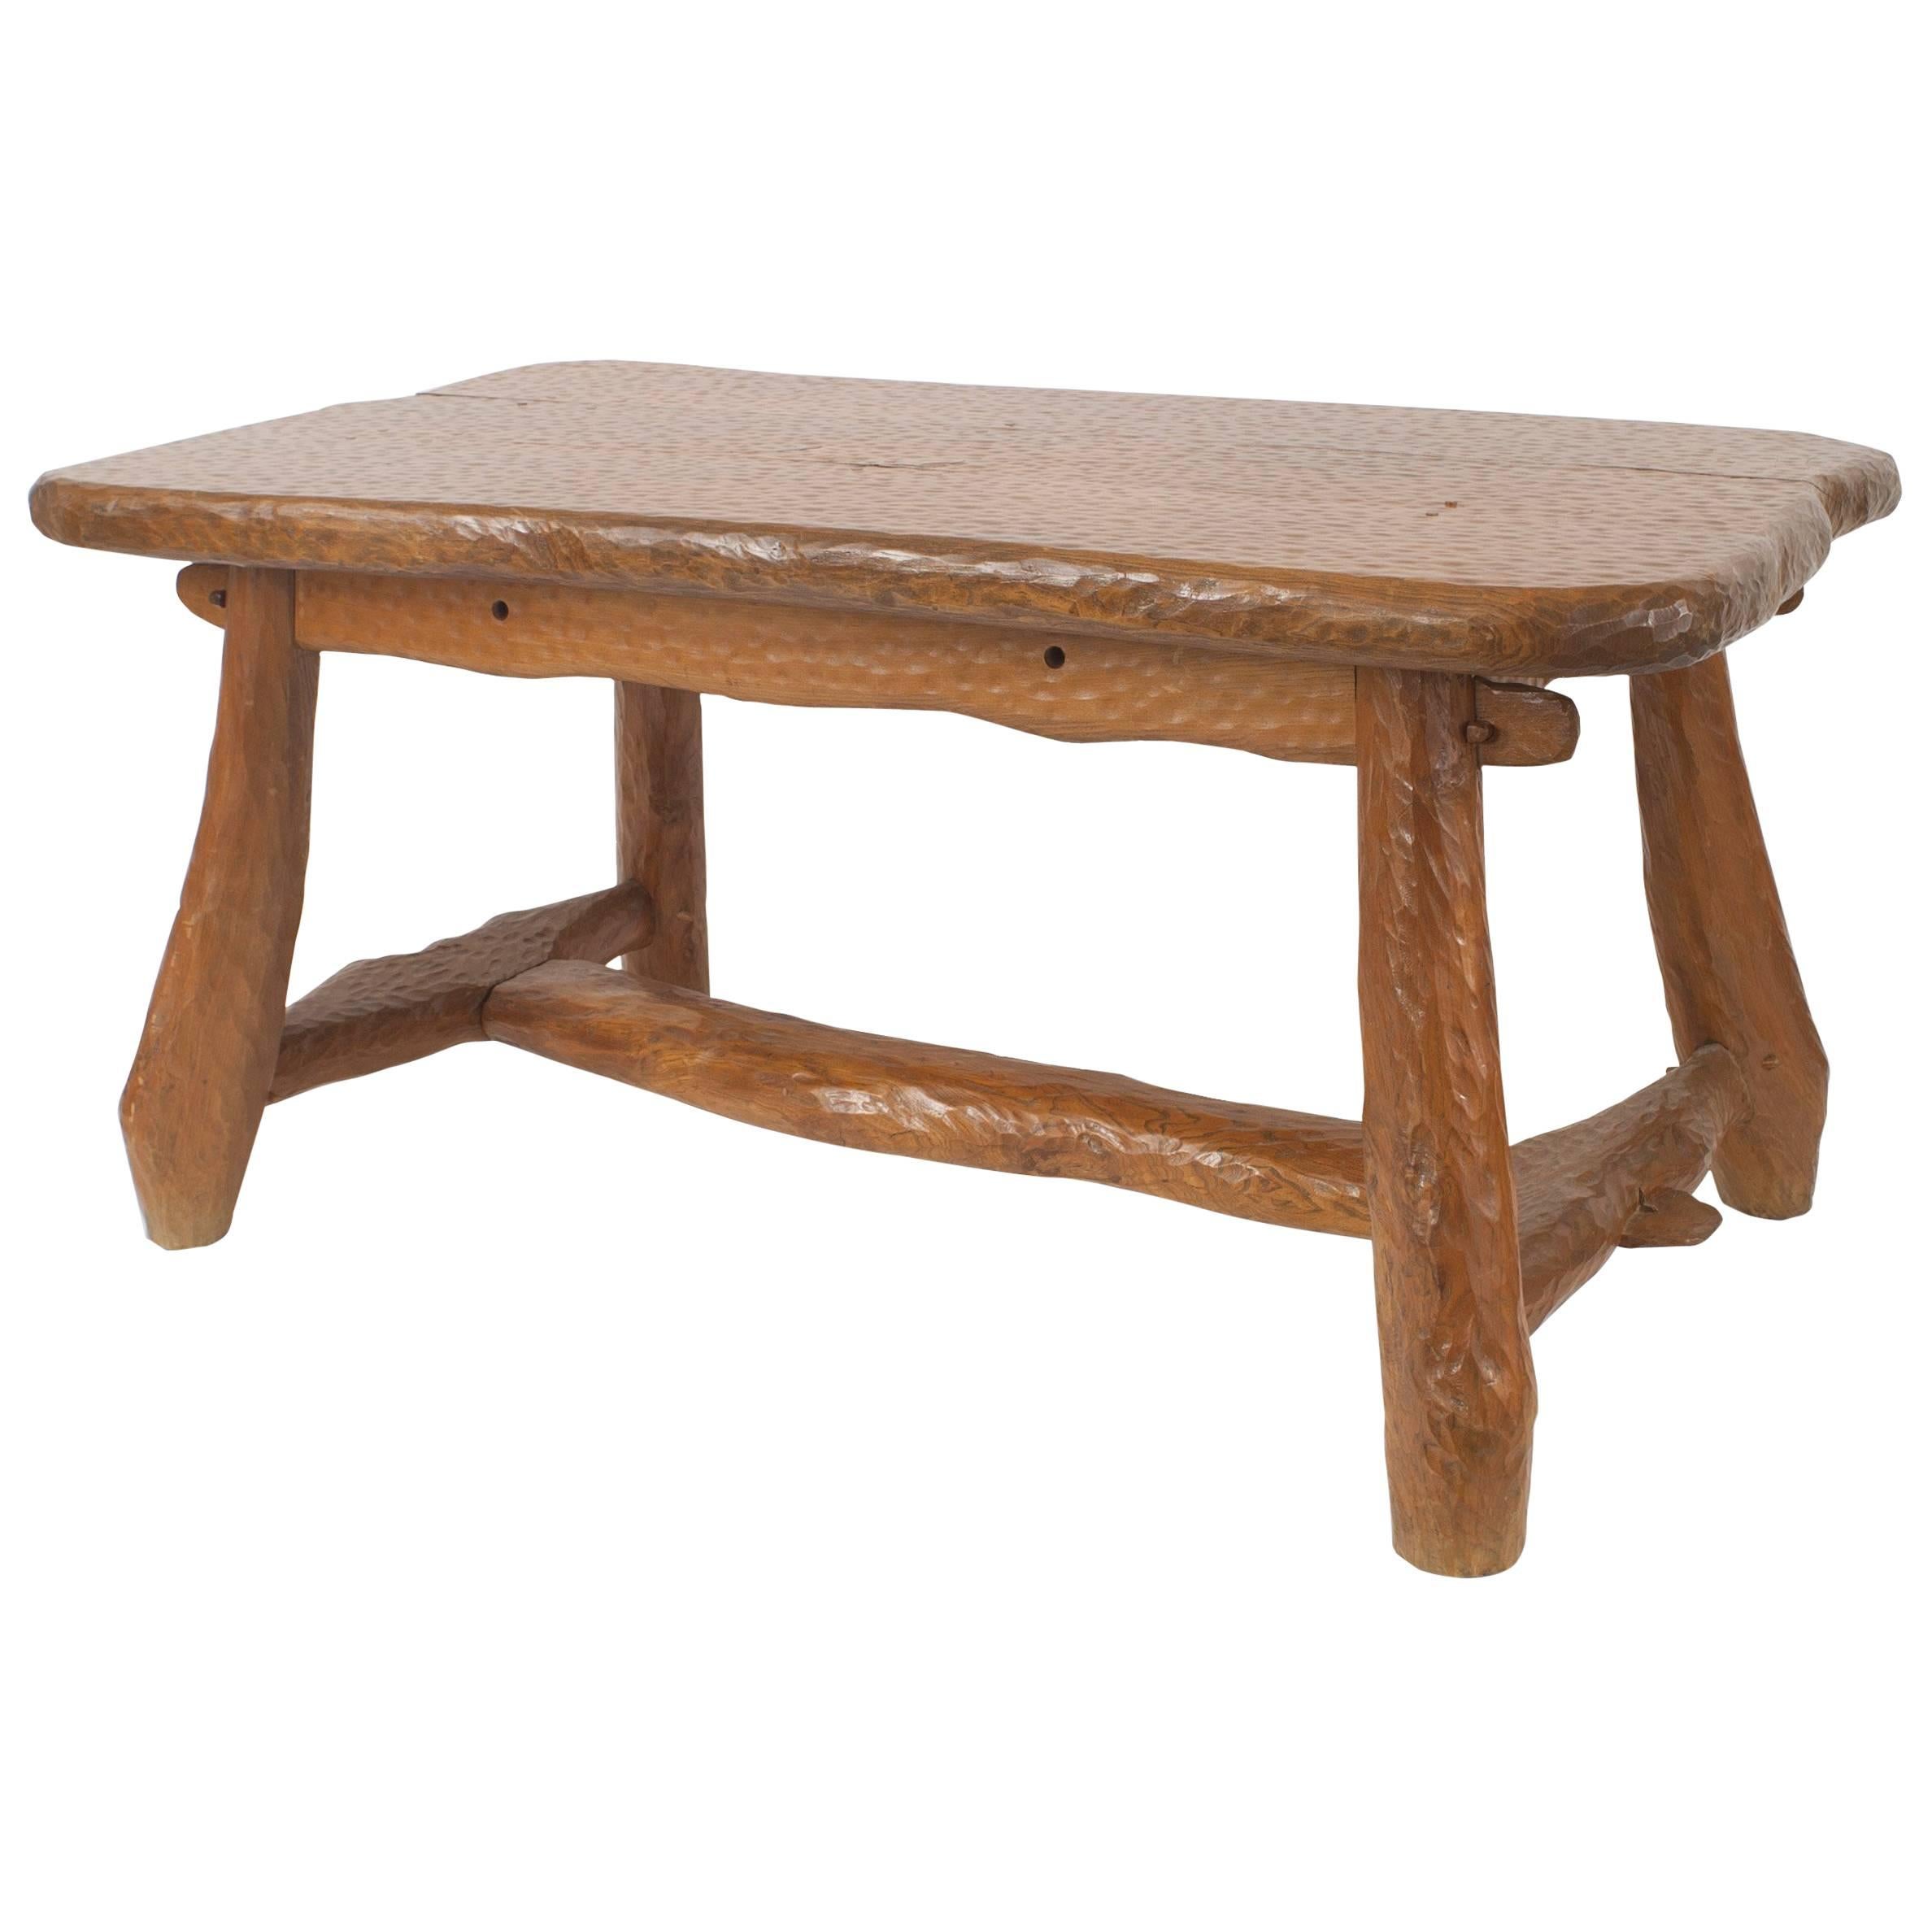 Rustic Adirondack Style Pine Dining Table